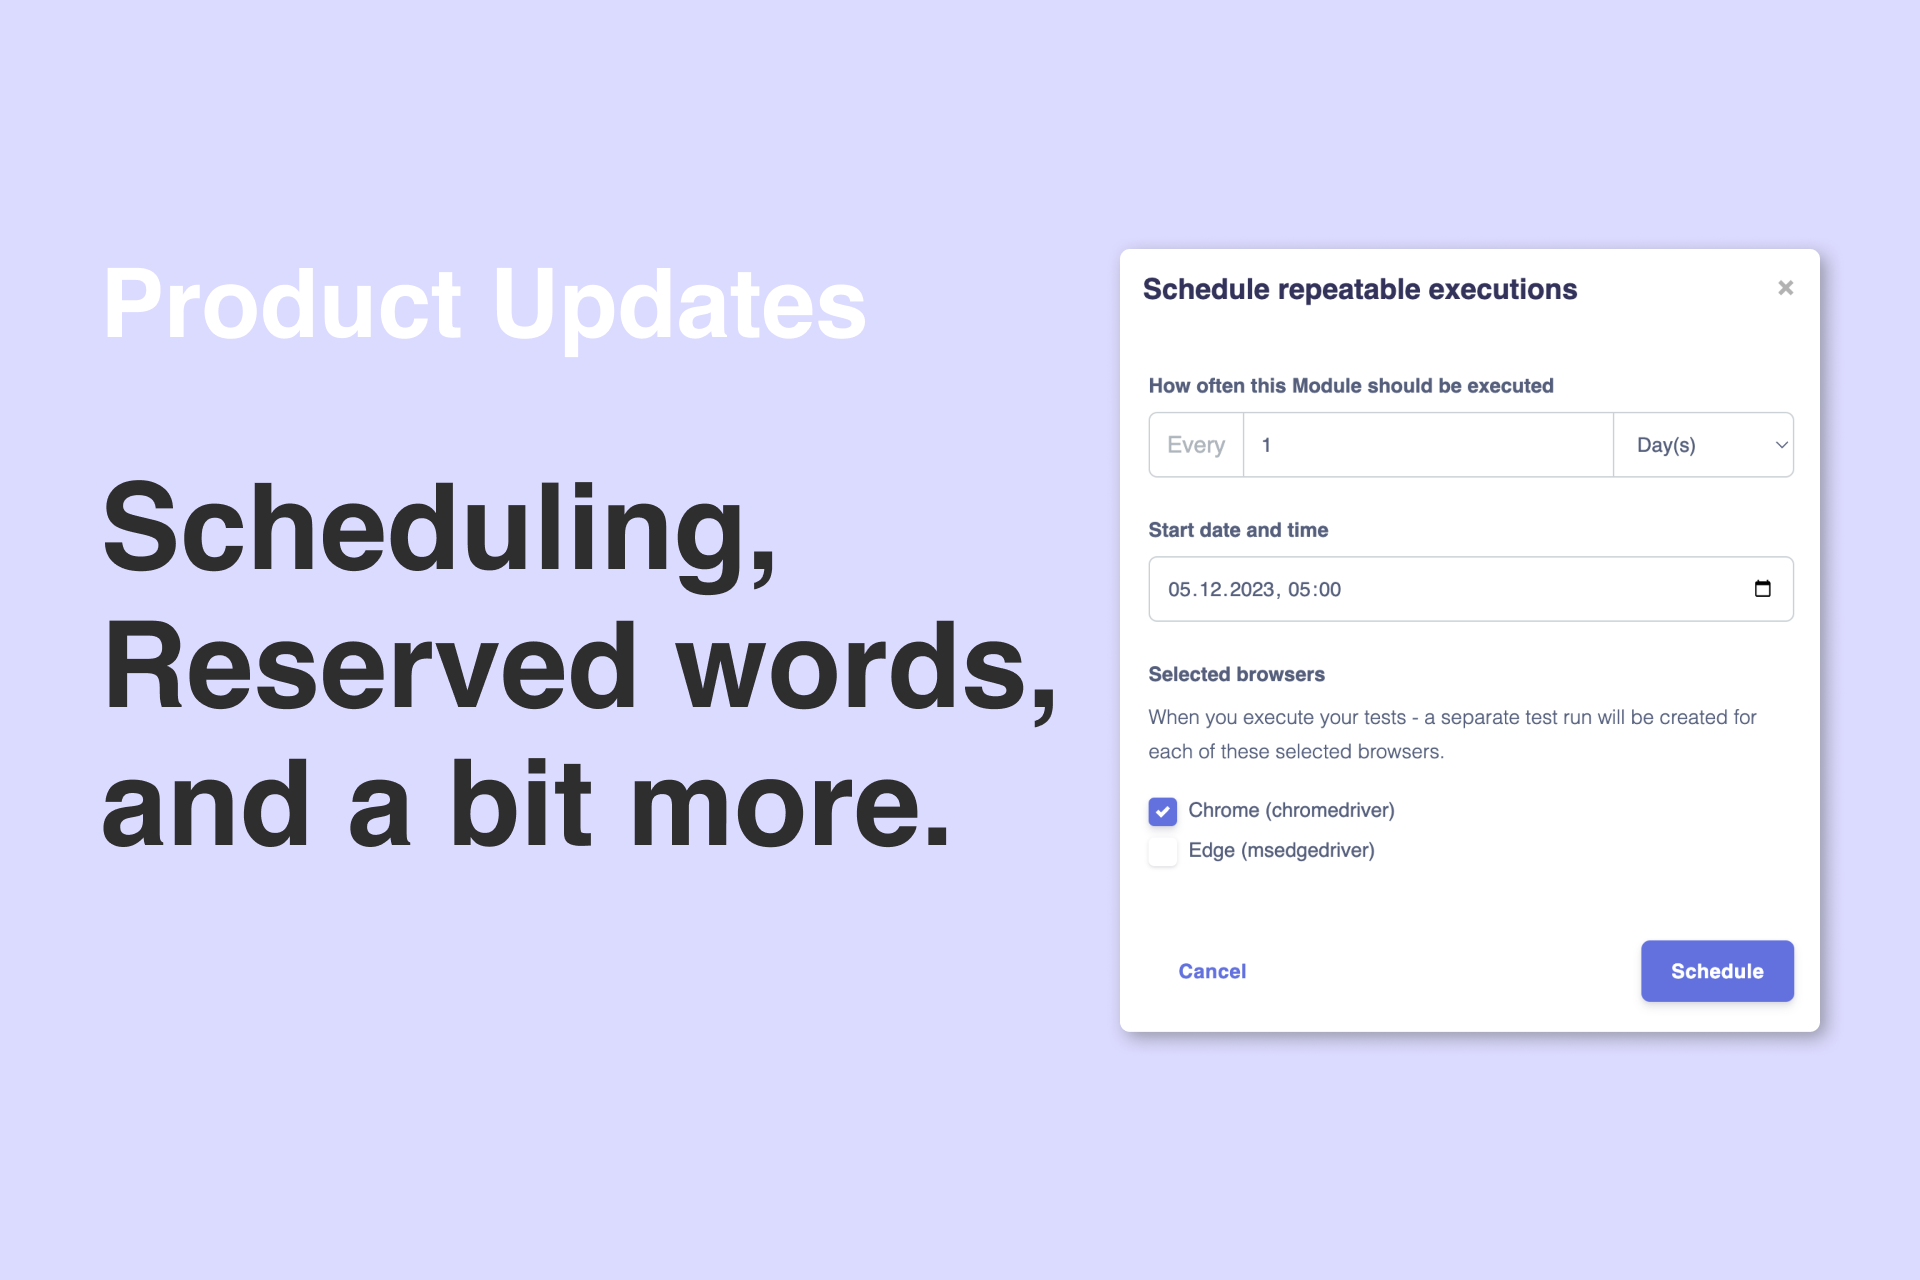 Product Updates: Scheduling, Reserved words, and a bit more